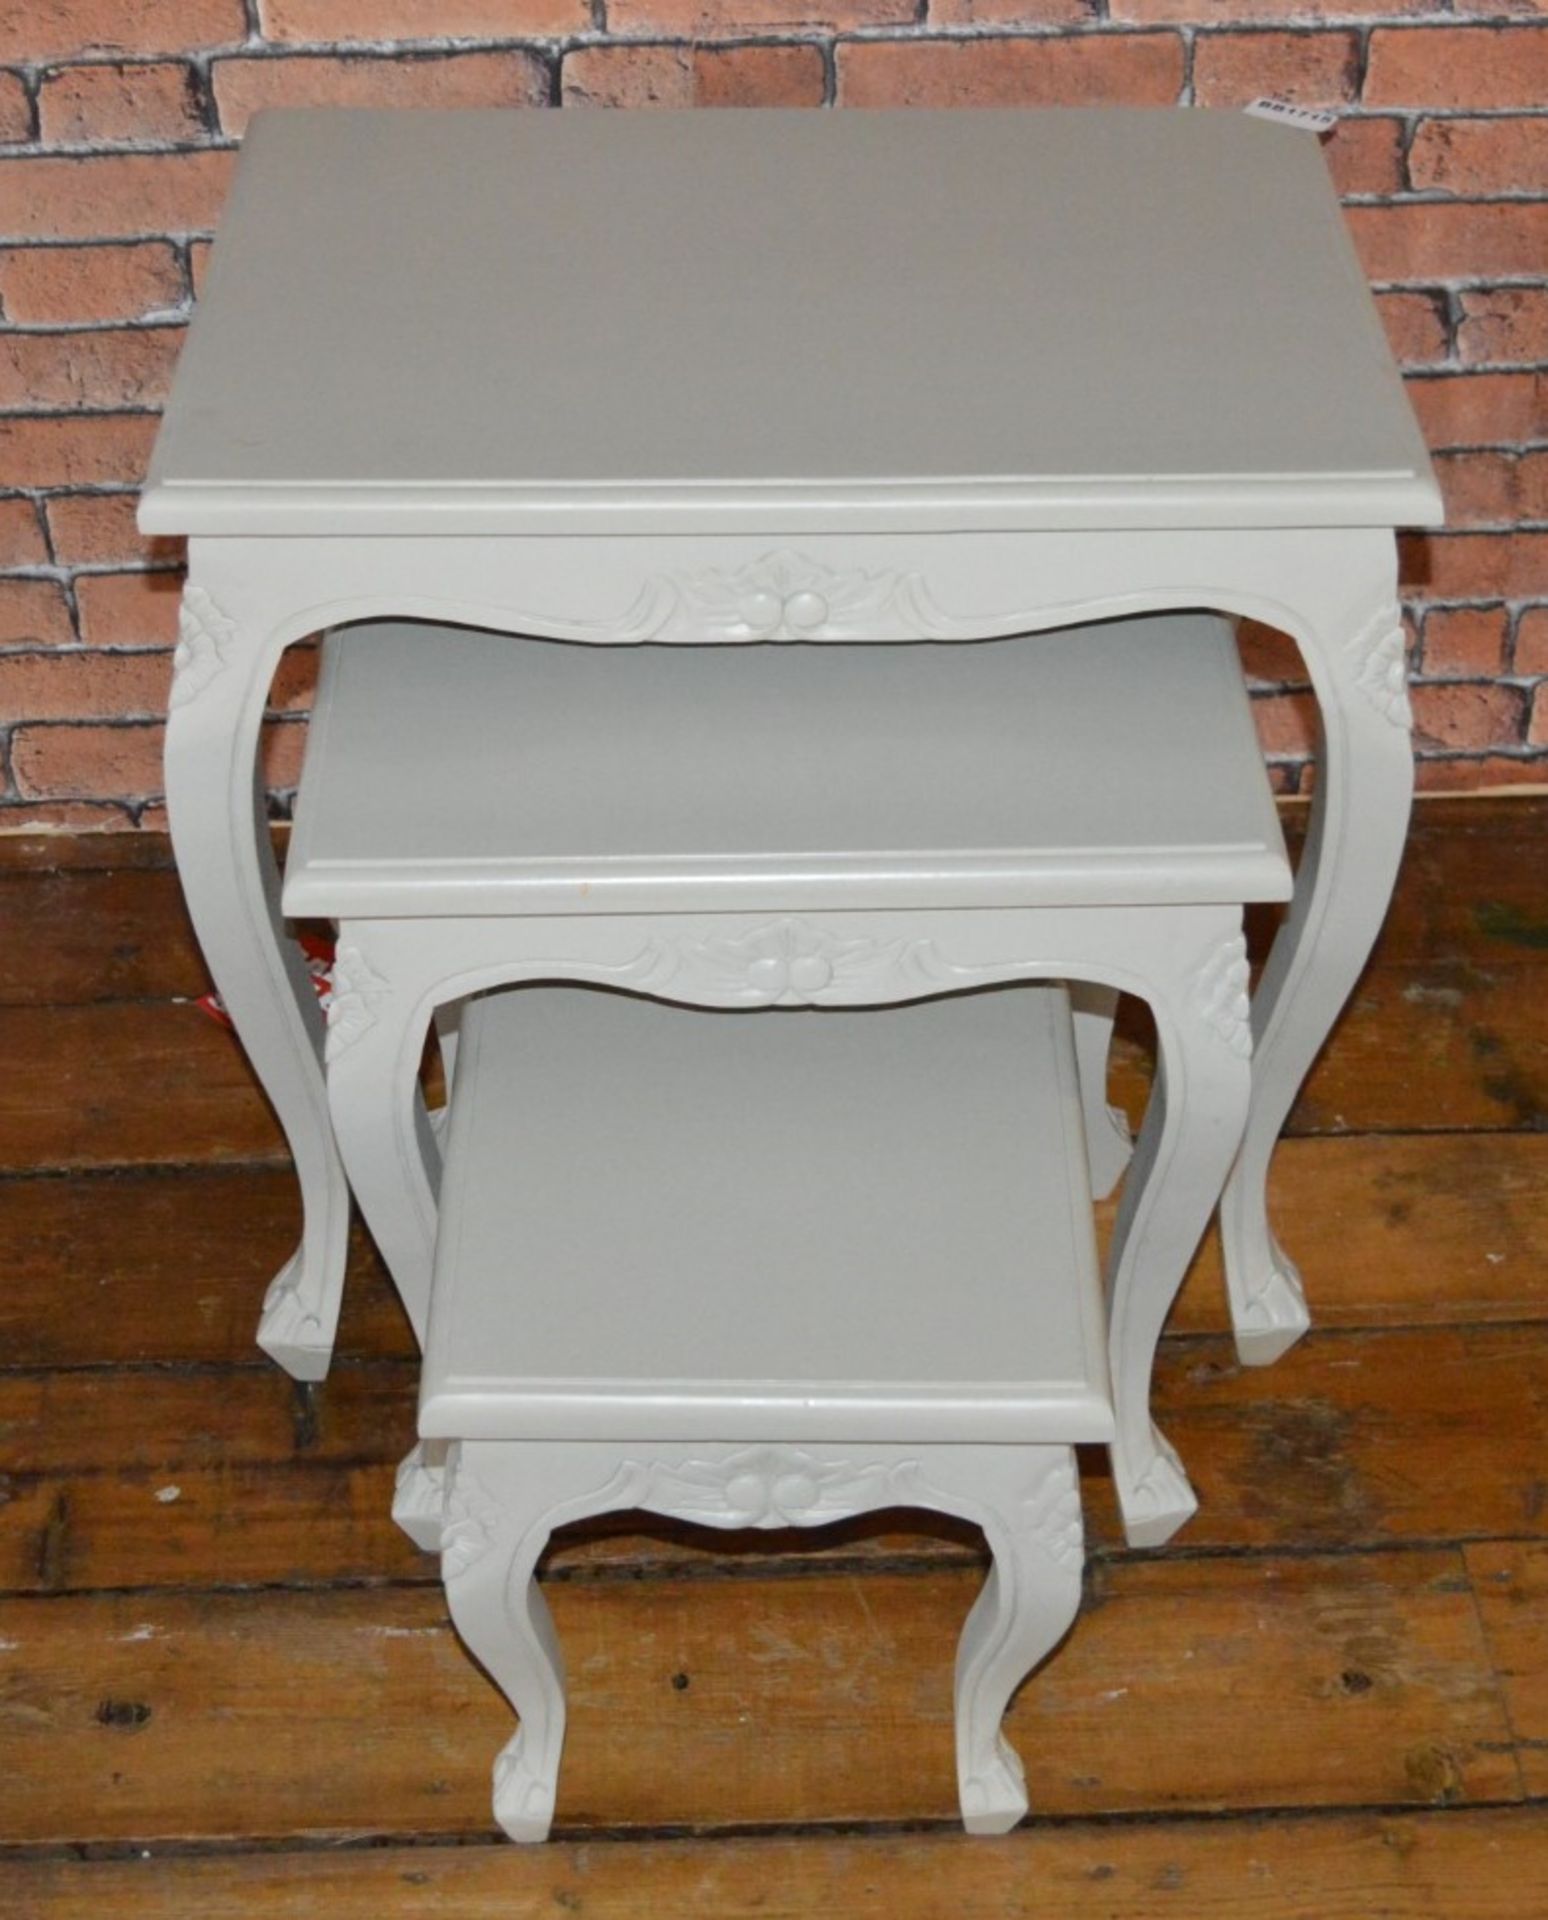 1 x Nest of Three Tables Finished in a Contemporary Grey - H61 x W59 x D45 cms - Ref BB1715 2F - - Image 2 of 6